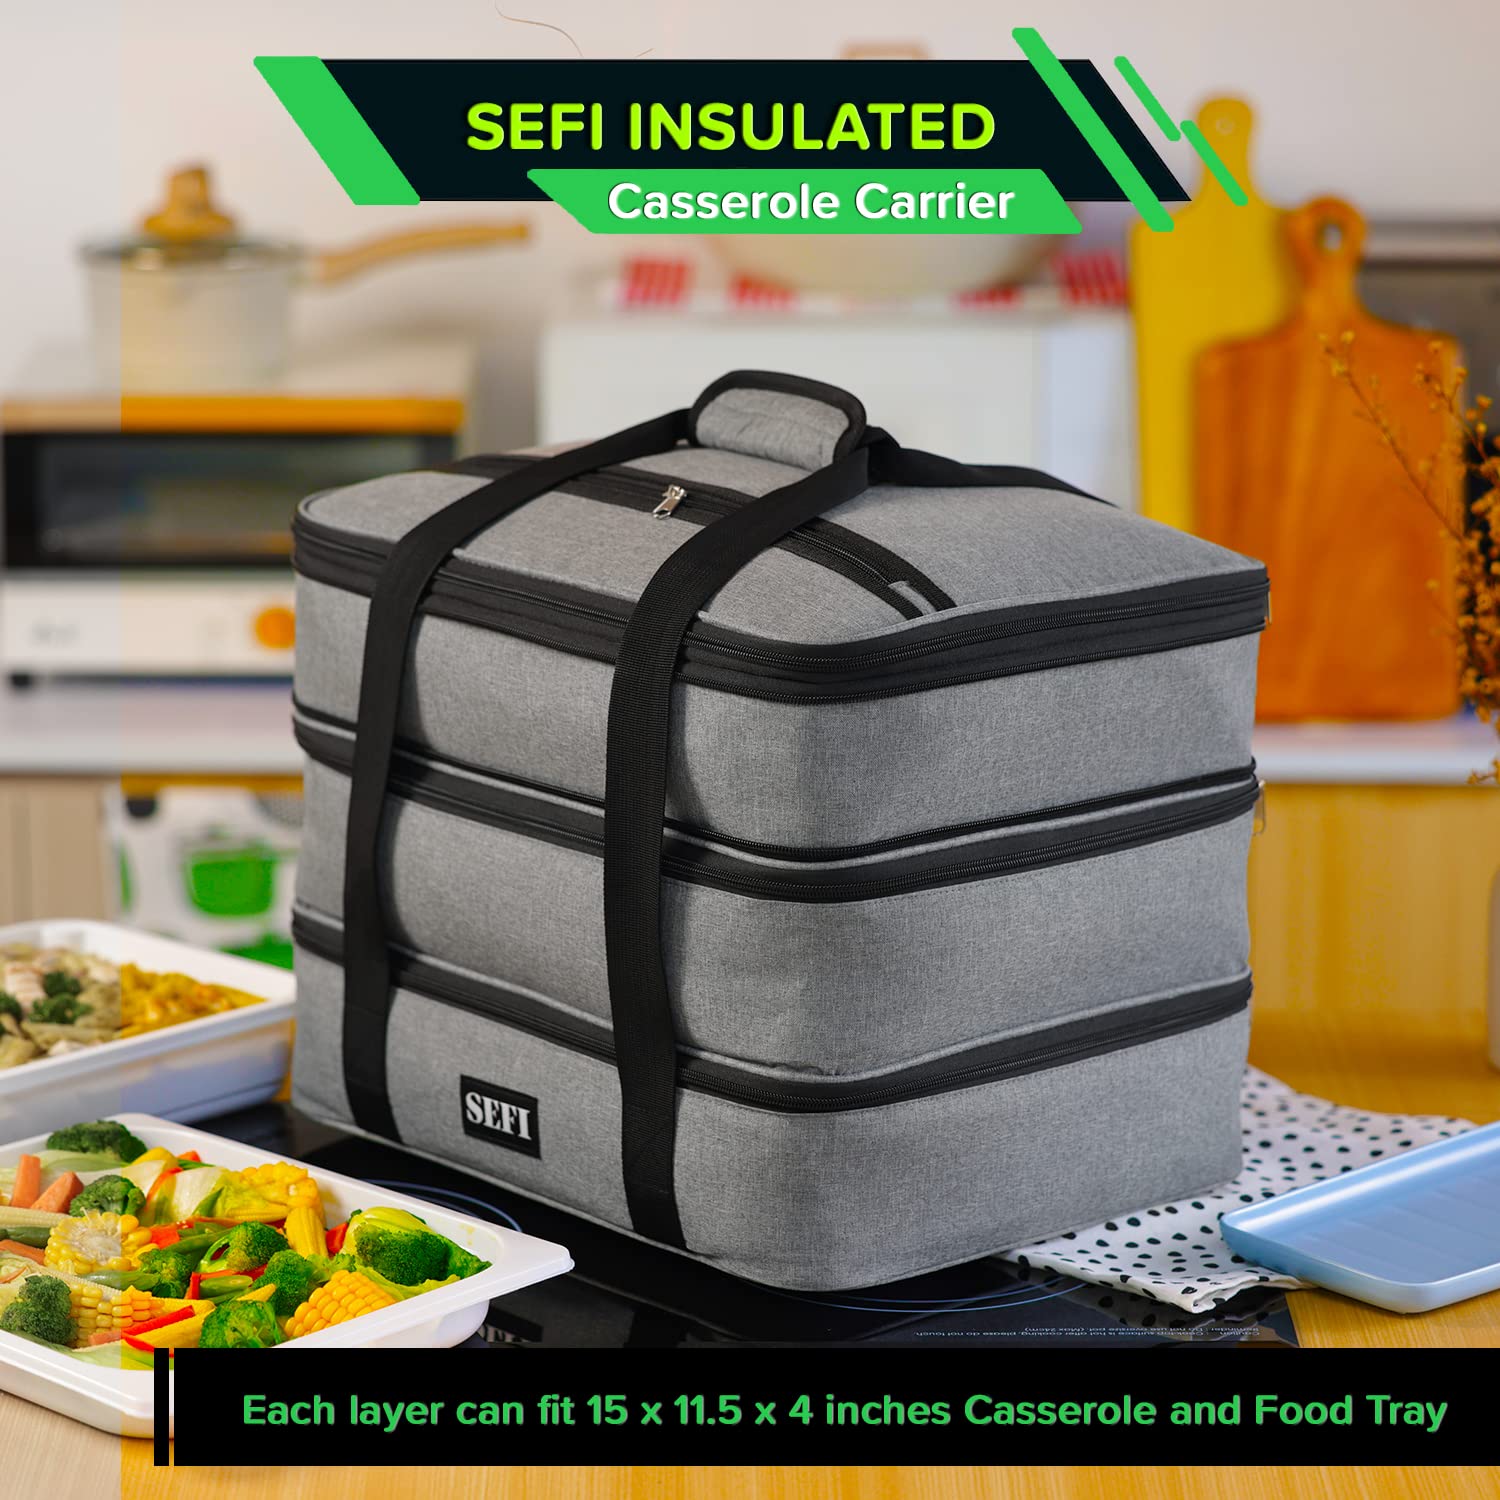 SEFI Insulated Casserole Dish Carrier 3 Decker for Hot Food or Cold Drink | Thermal Food Container with Expandable Compartment | Keep Food Warm for Travel, Picnic & Special Occasions (Gray)